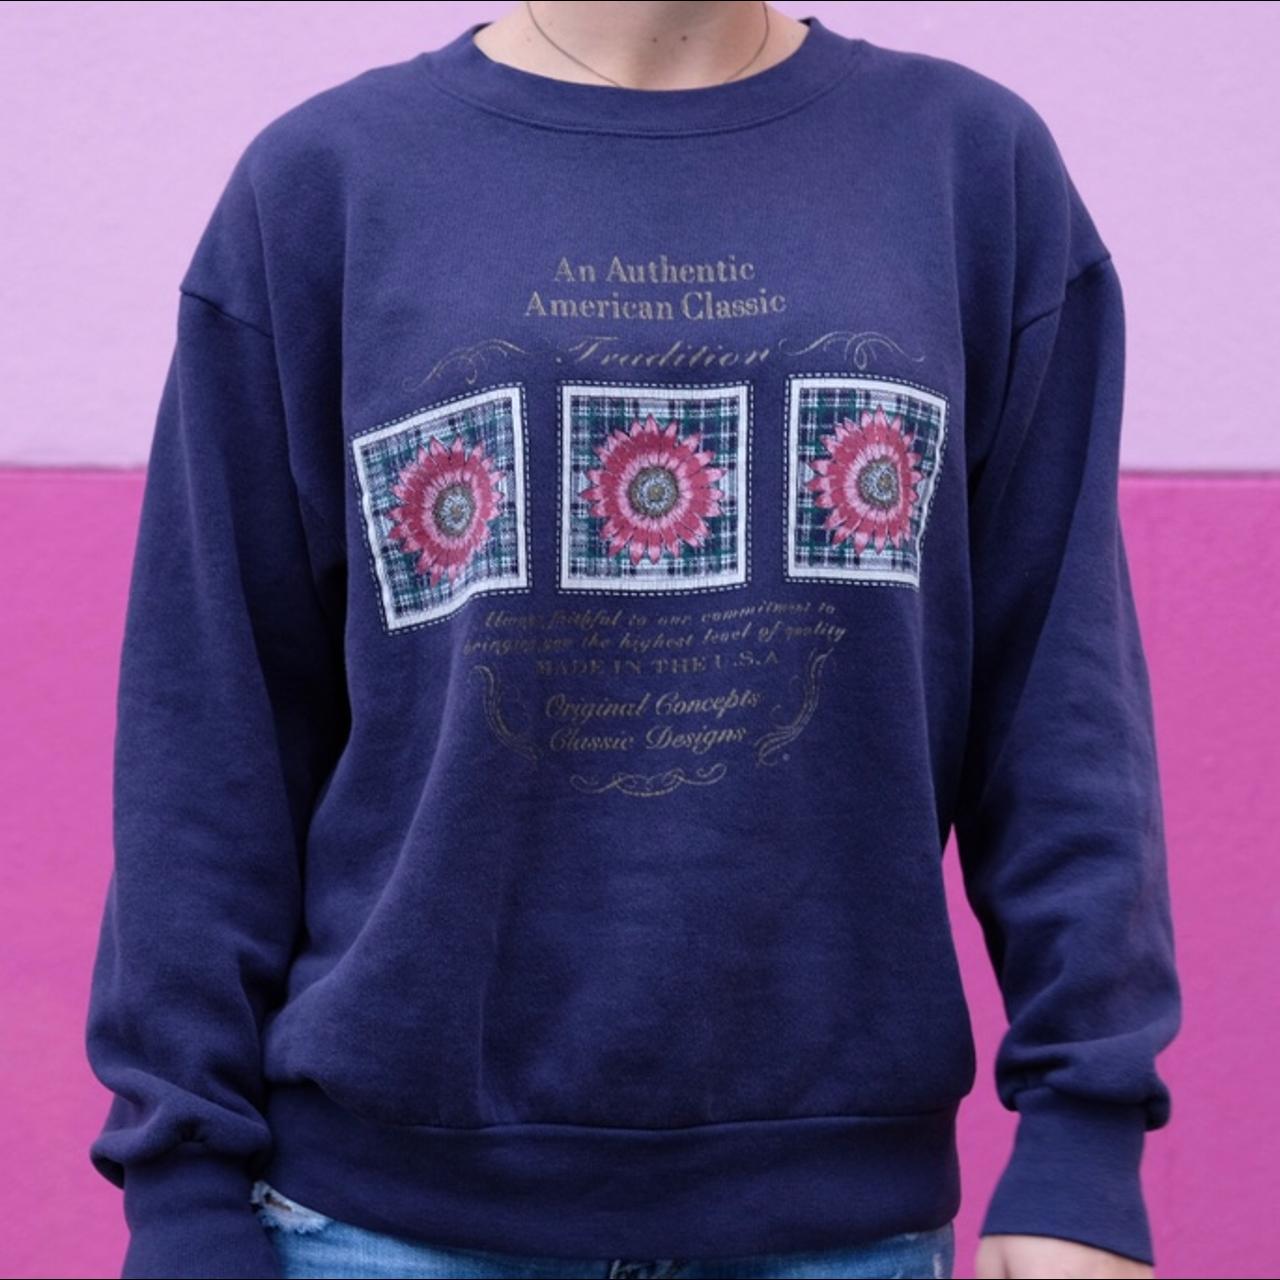 Product Image 1 - Vintage American Classic Crewneck

size: Fits